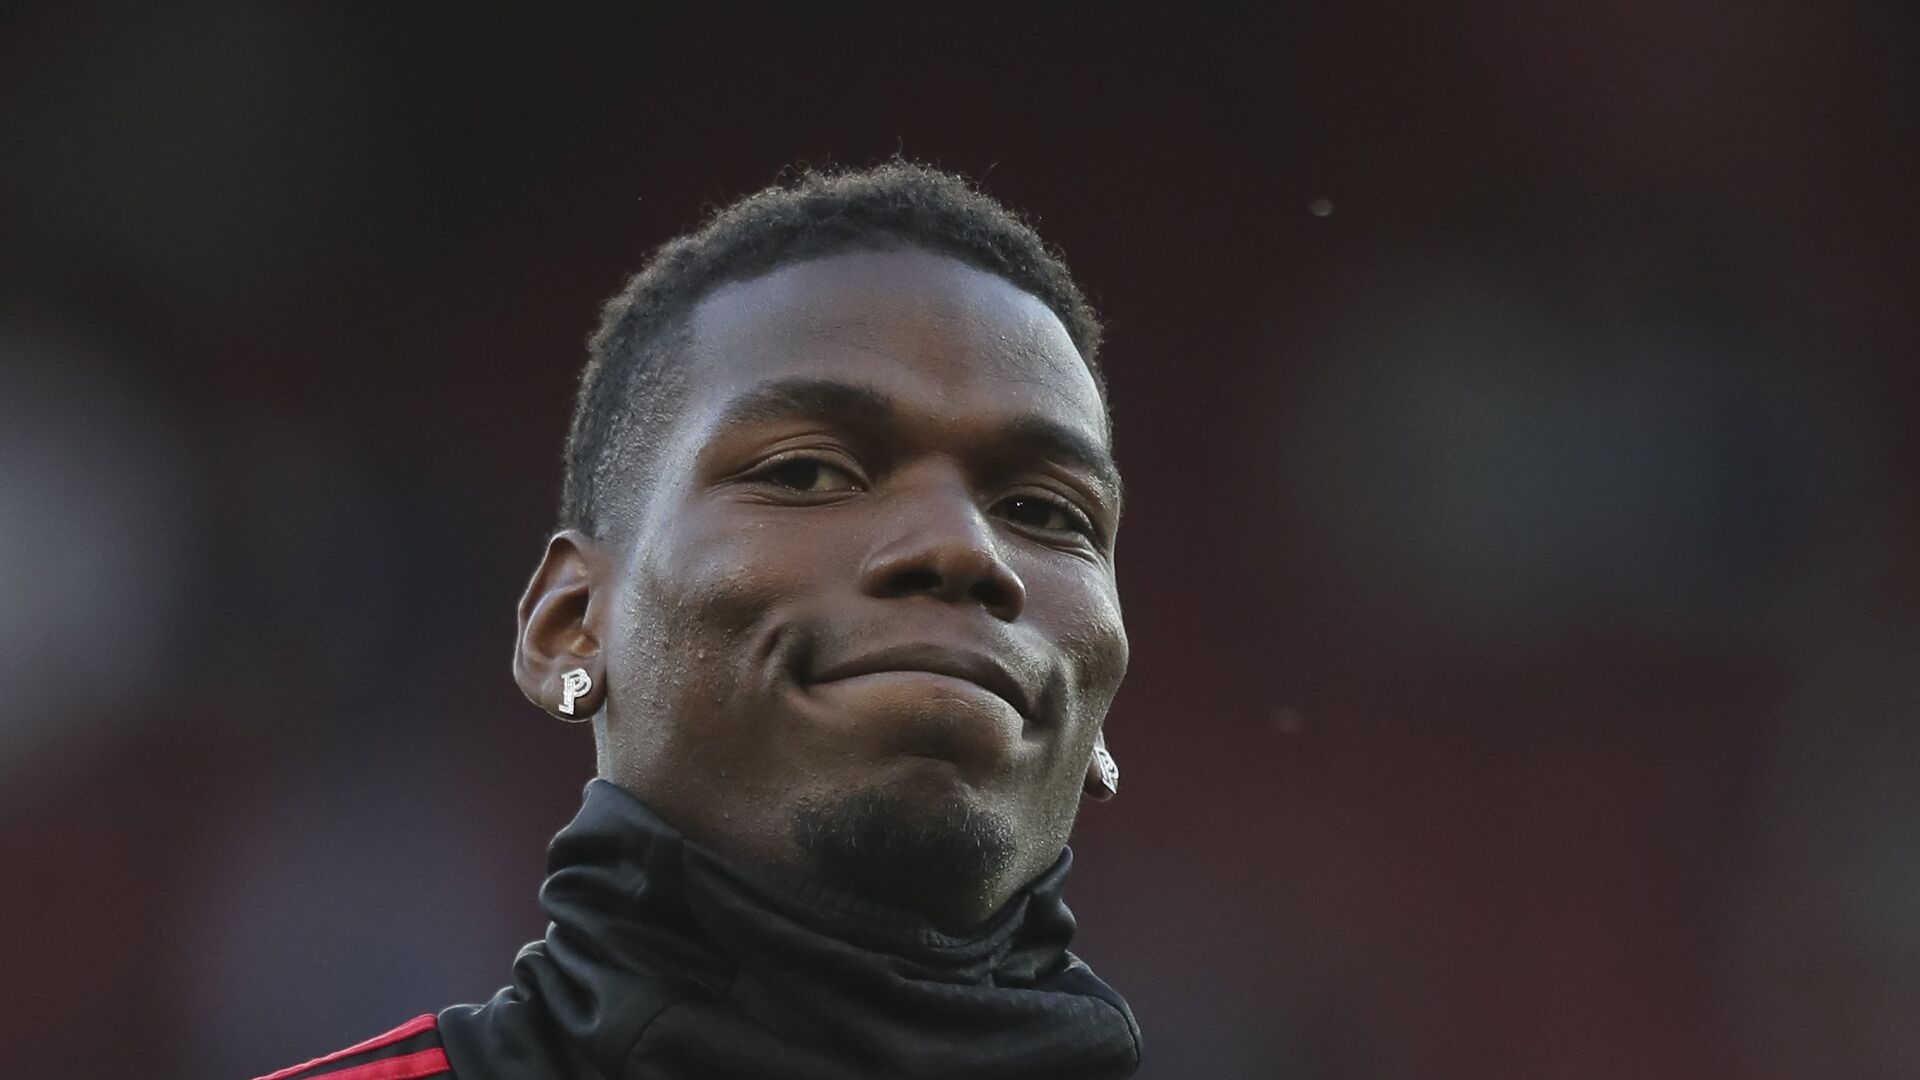 Manchester United's Paul Pogba applauds the fans as he takes part in the warm up prior to the start of the English Premier League soccer match between Manchester United and Leicester City at Old Trafford, in Manchester, England, Friday, Aug. 10, 2018 - اسپوتنیک افغانستان  , 1920, 06.06.2022